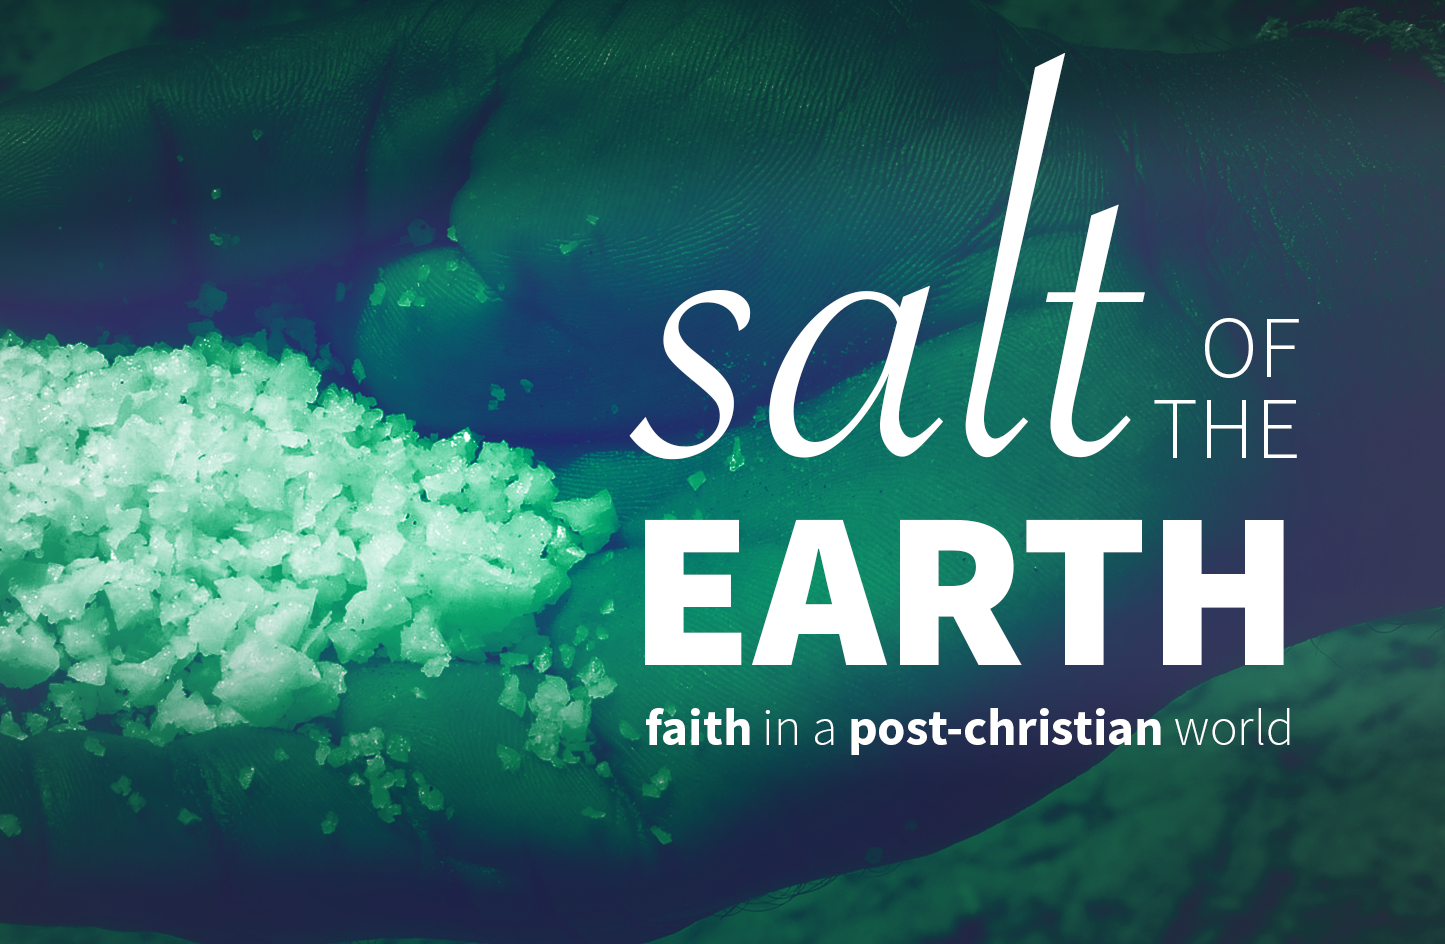 Image of hand holding salt crystals. Text reads "Salt of the Earth: Faith in a Post-Christian World"